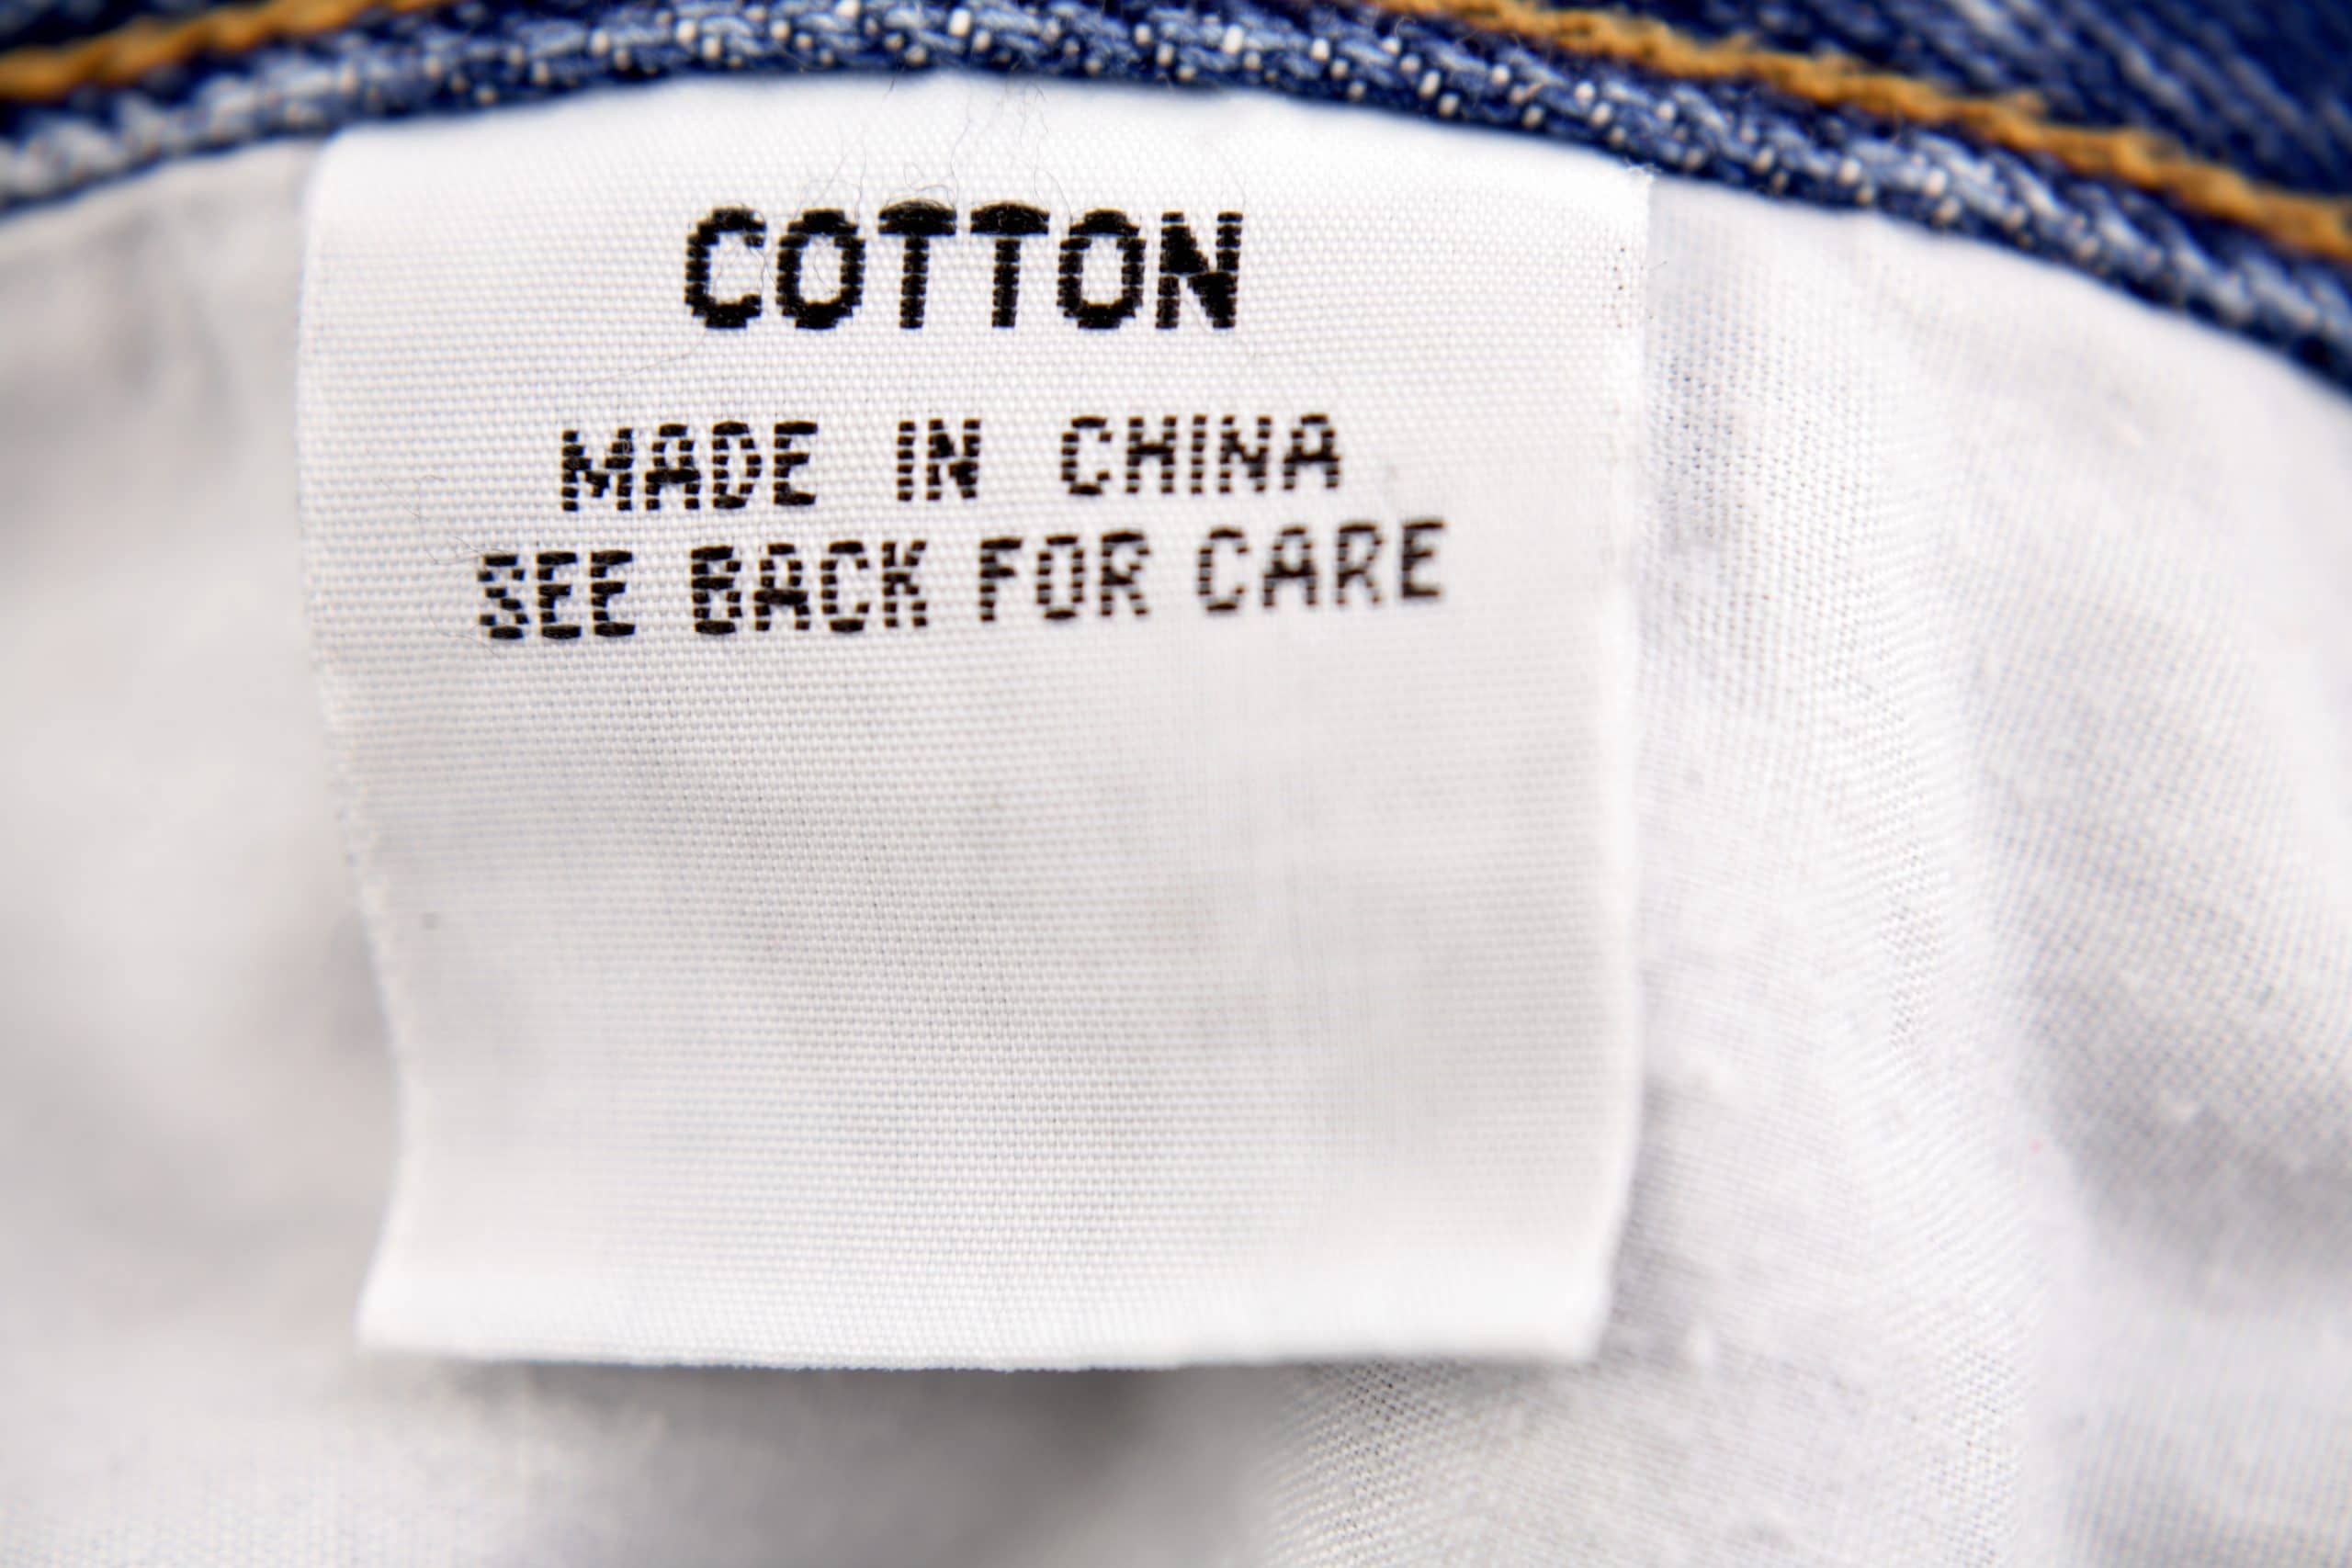 Cotton made in China